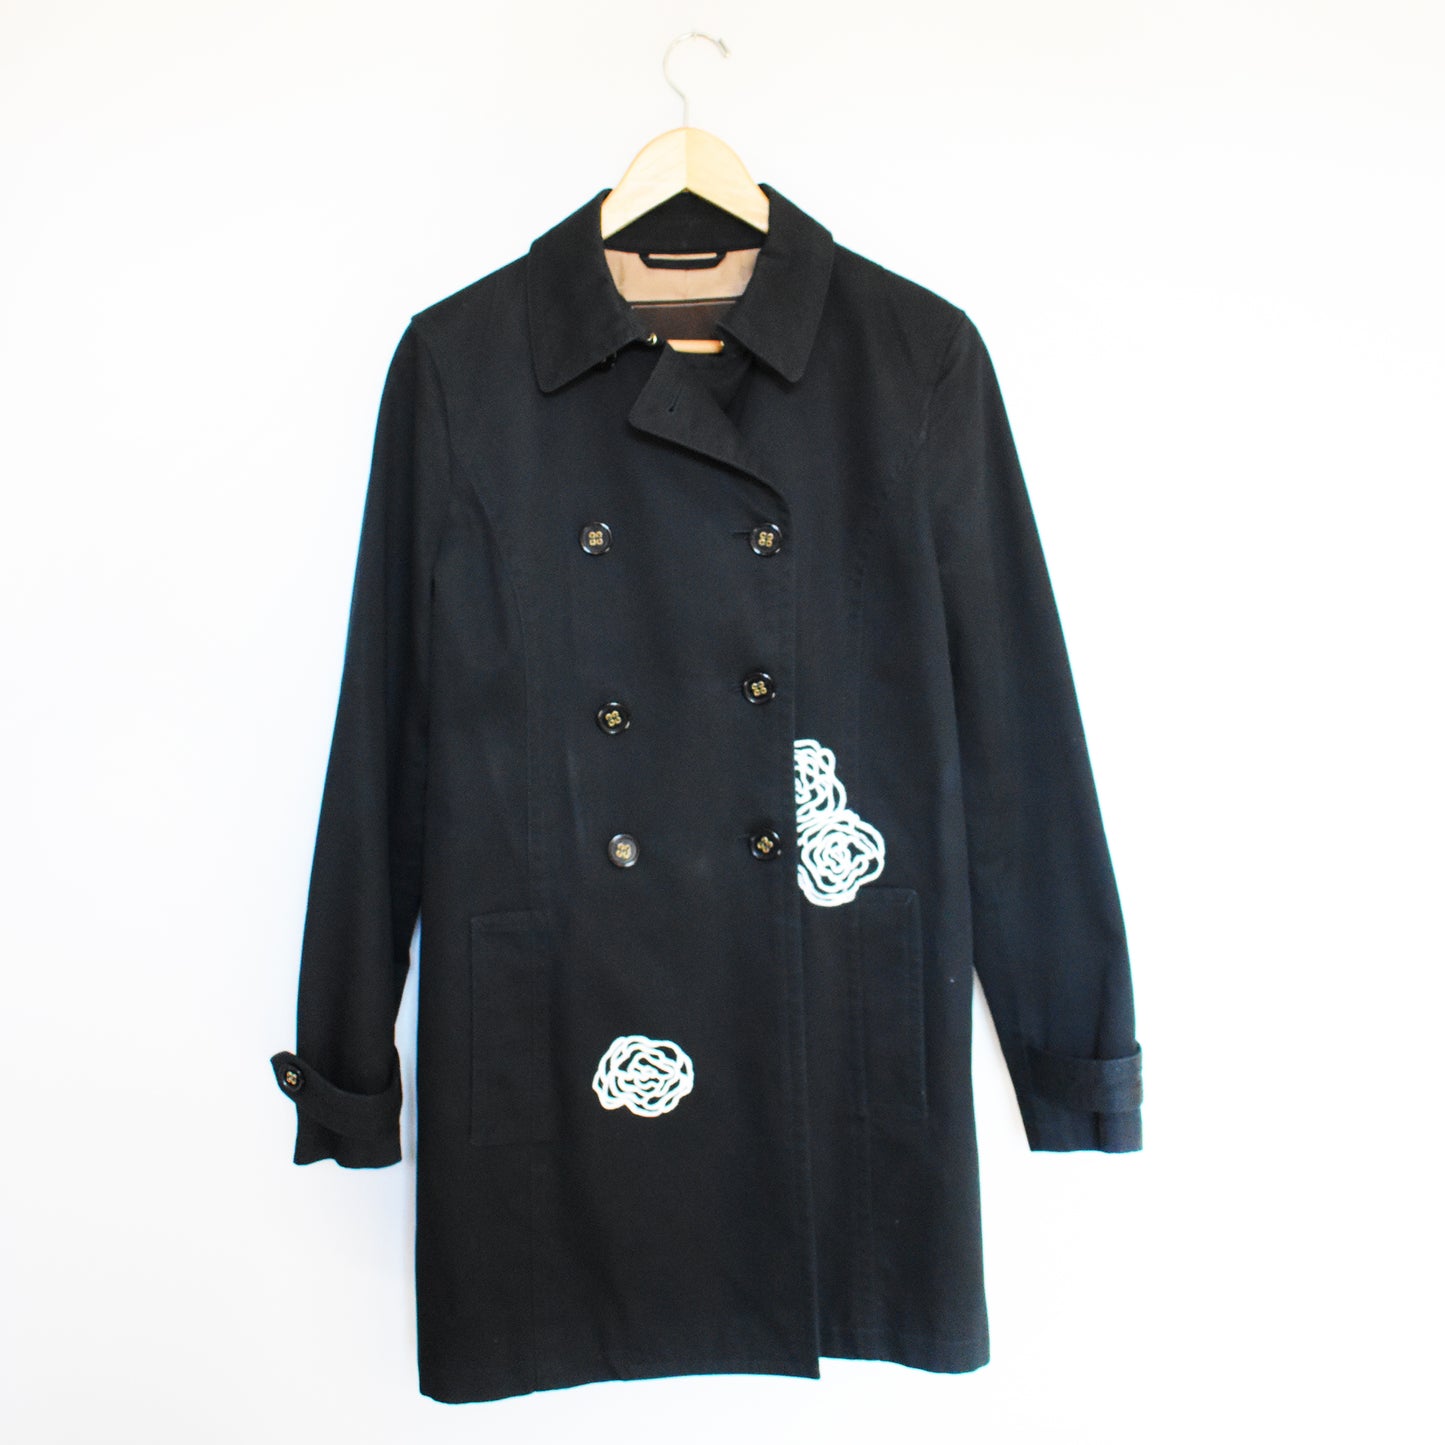 Graffitti Rose Trench Coat (Coach) - Size S/P - Handpainted by Jessica Carbone